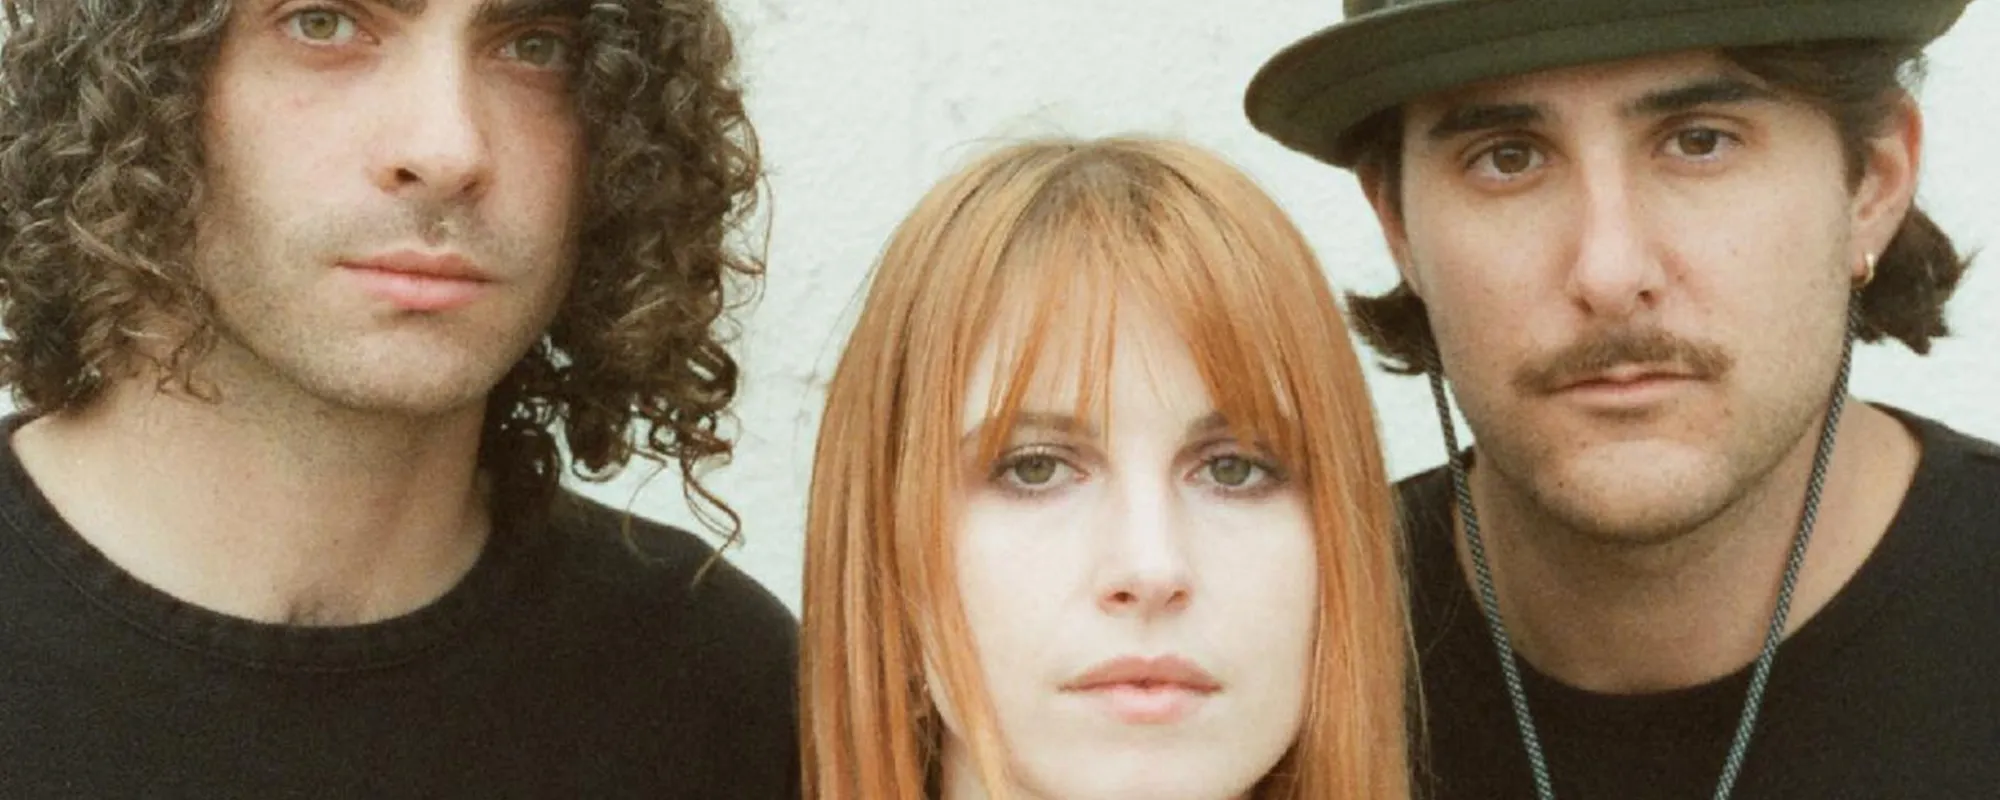 Paramore to Donate Upcoming Tour Proceeds To Reproductive & Abortion Service Providers